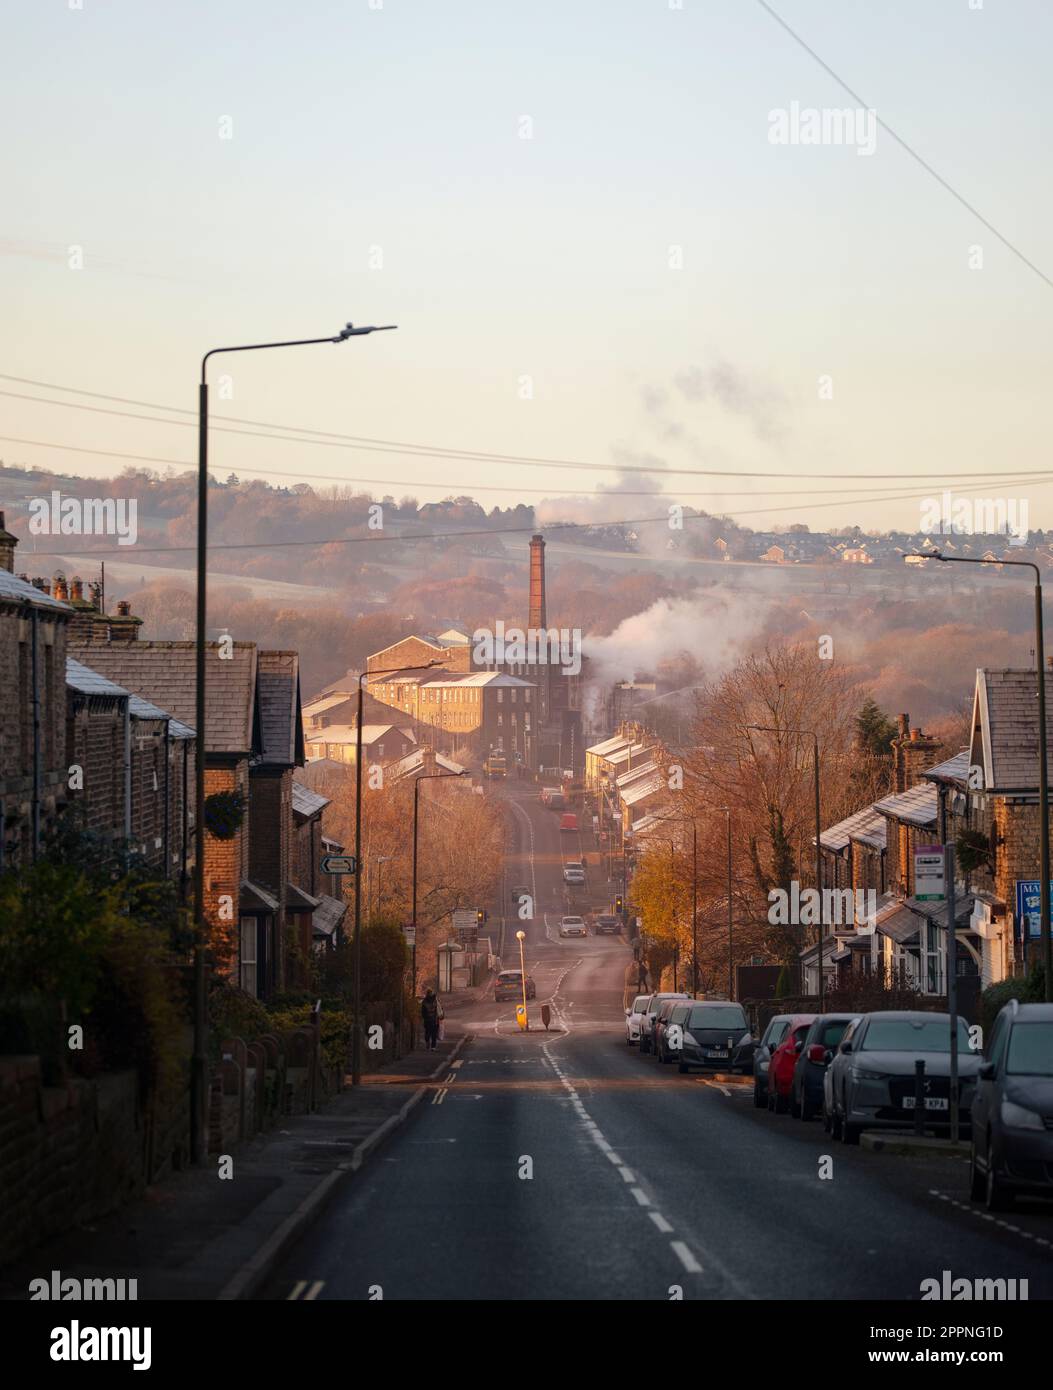 The Swizzles sweet factory in New Mills, Derbyshire on a frosty winter morning. Industry in a northern English town with smoke from the chimneys. Stock Photo